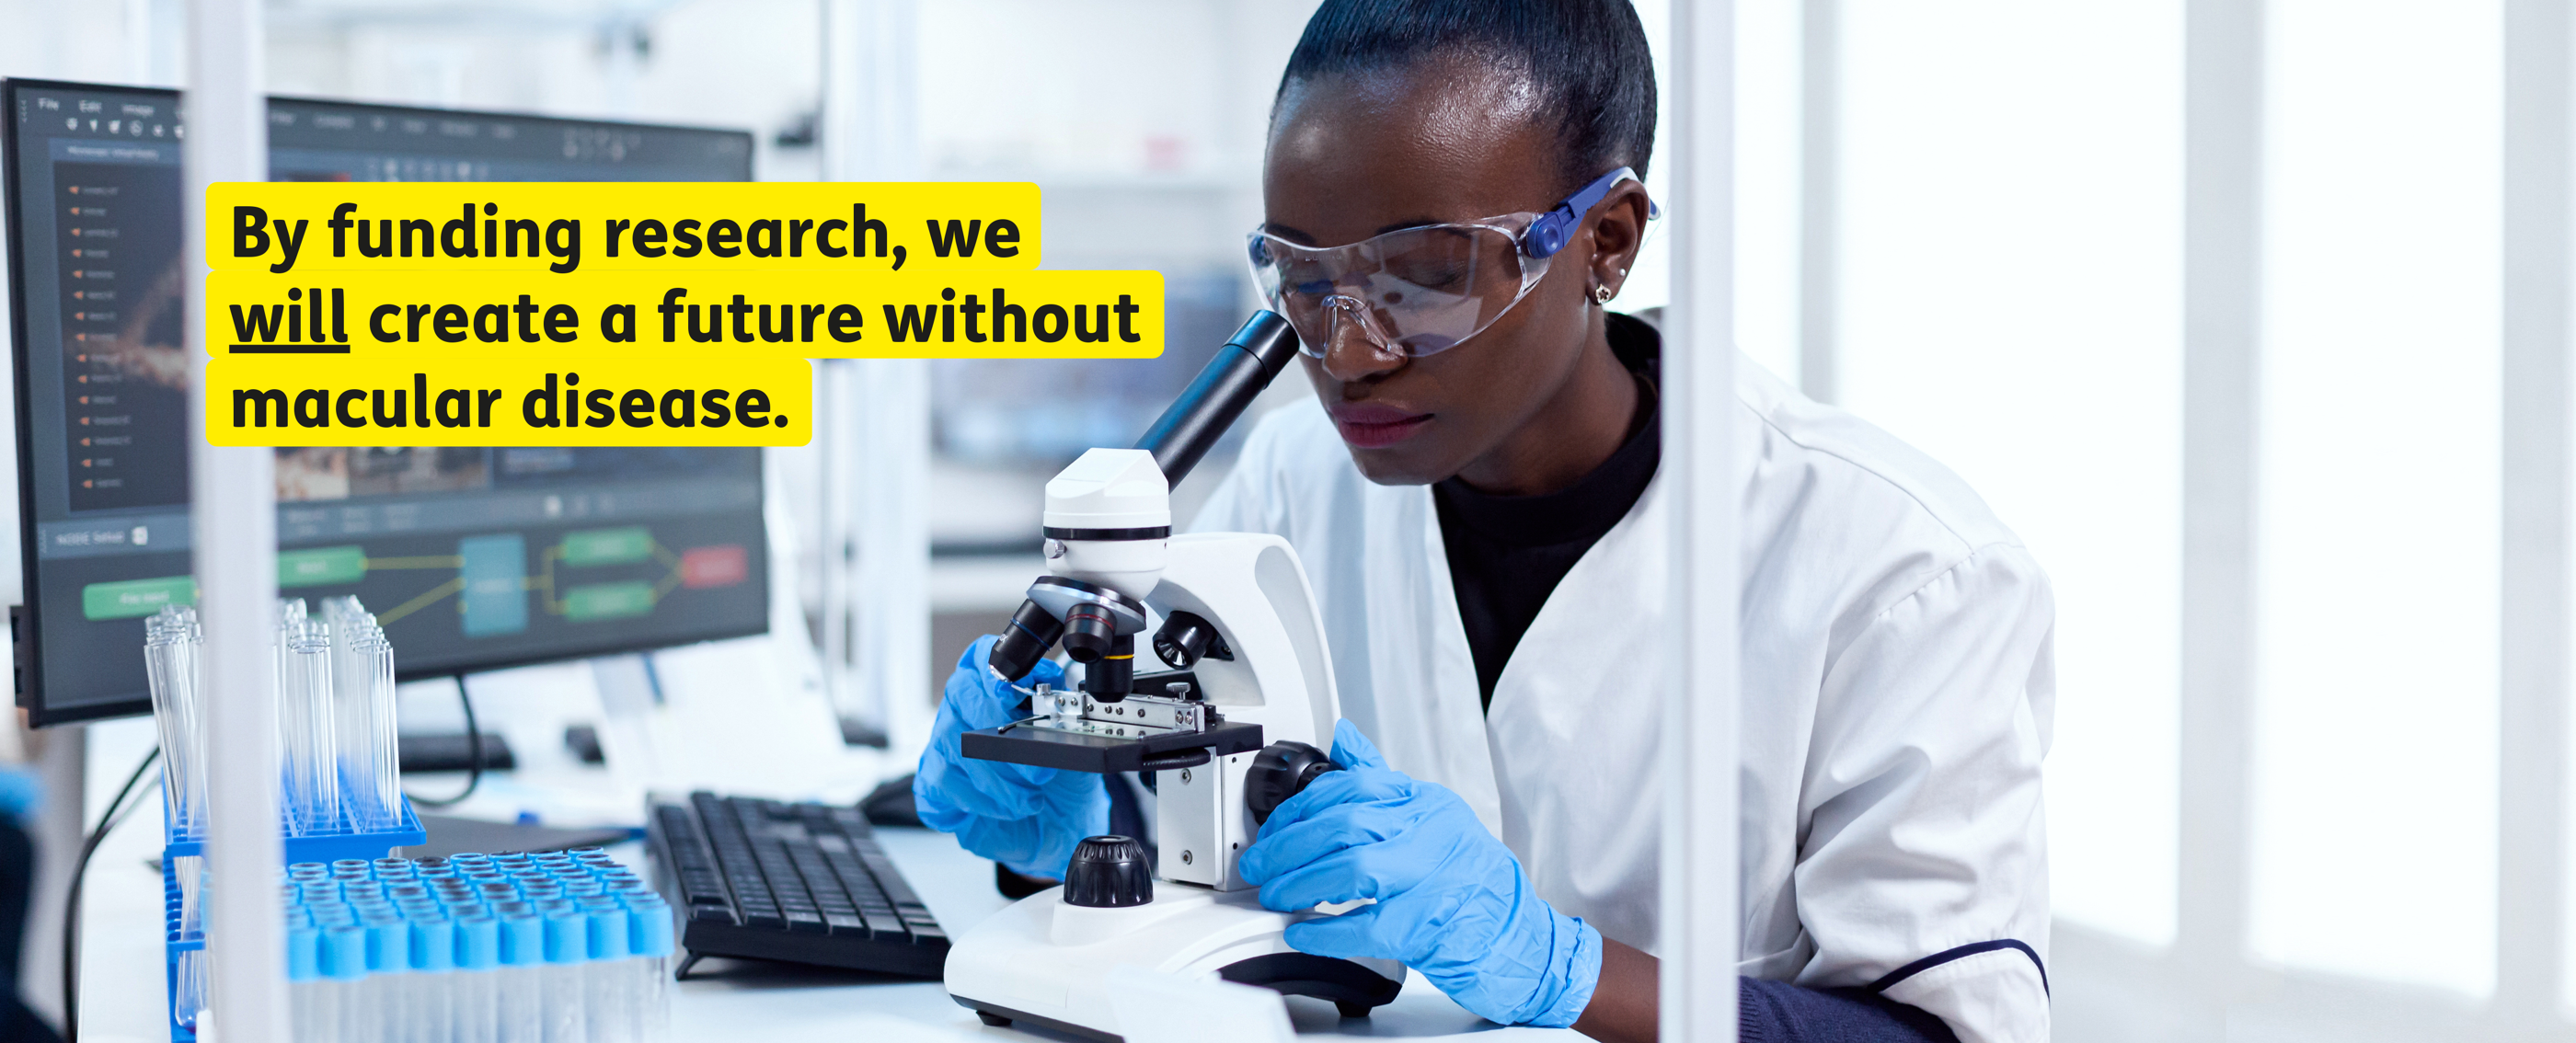 Researcher with microscope with caption 'By funding research, we will create a future without macular disease.'